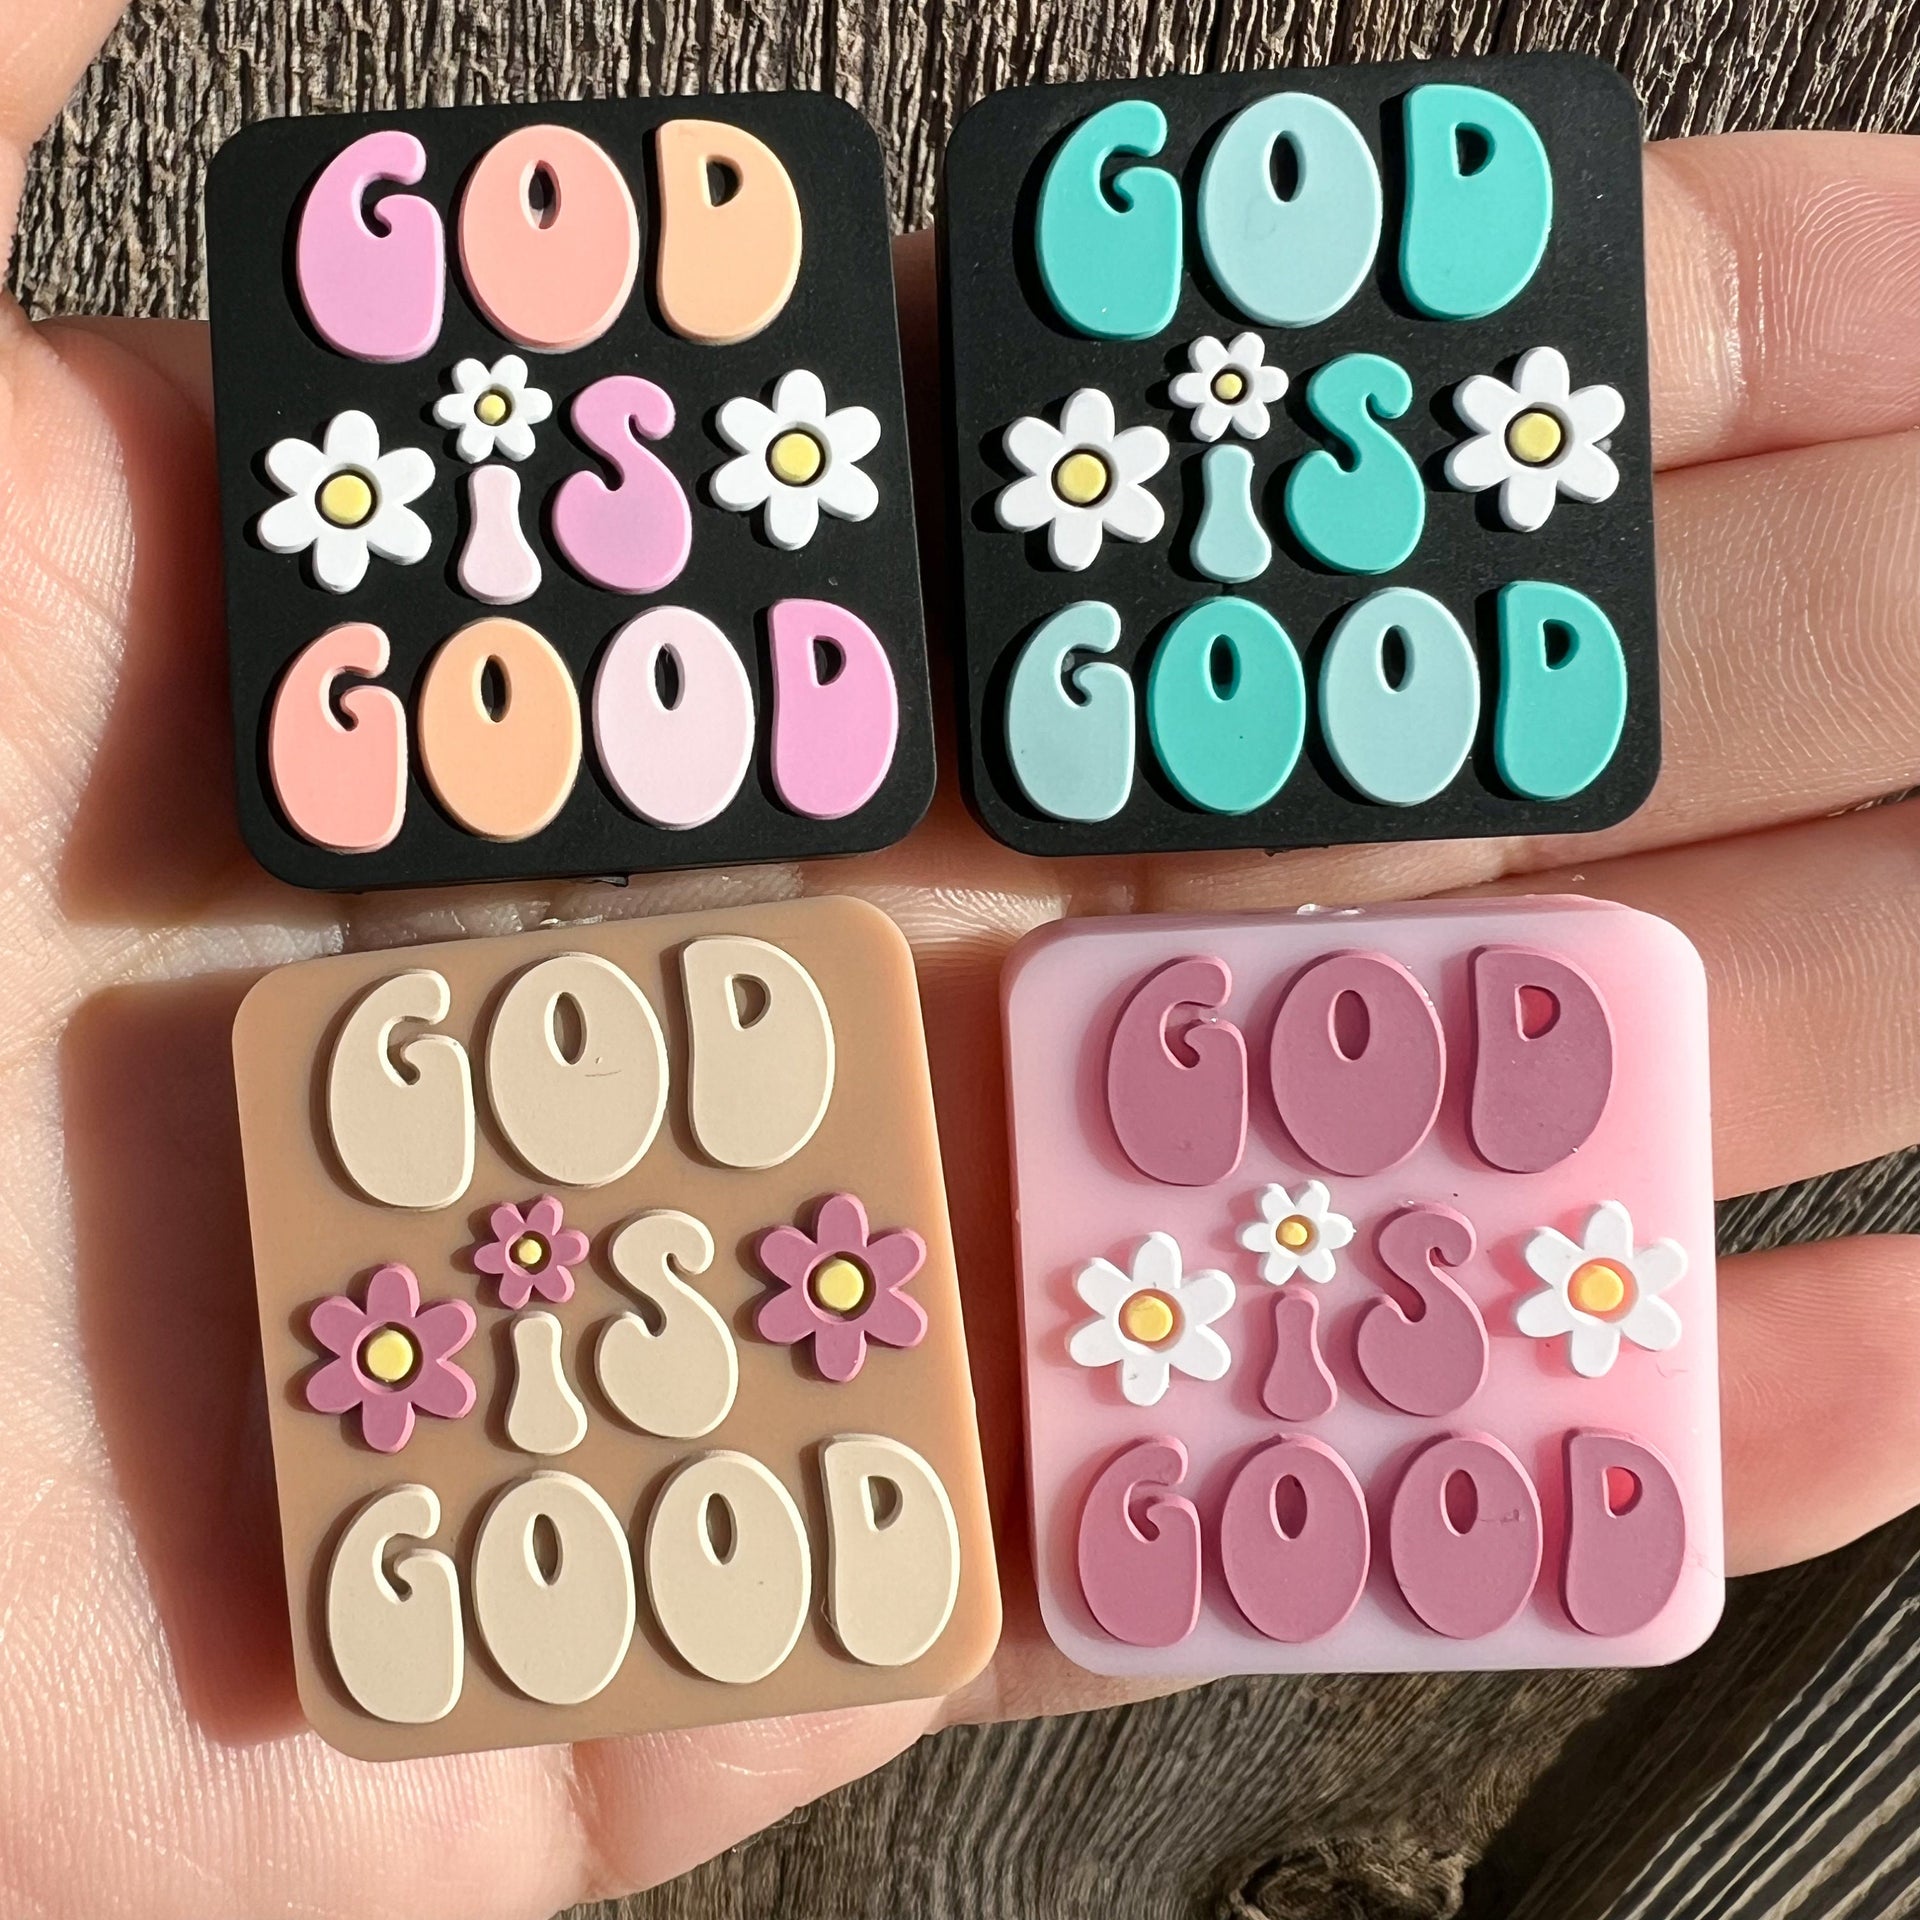 Only Good Vibes Silicone Focal Beads